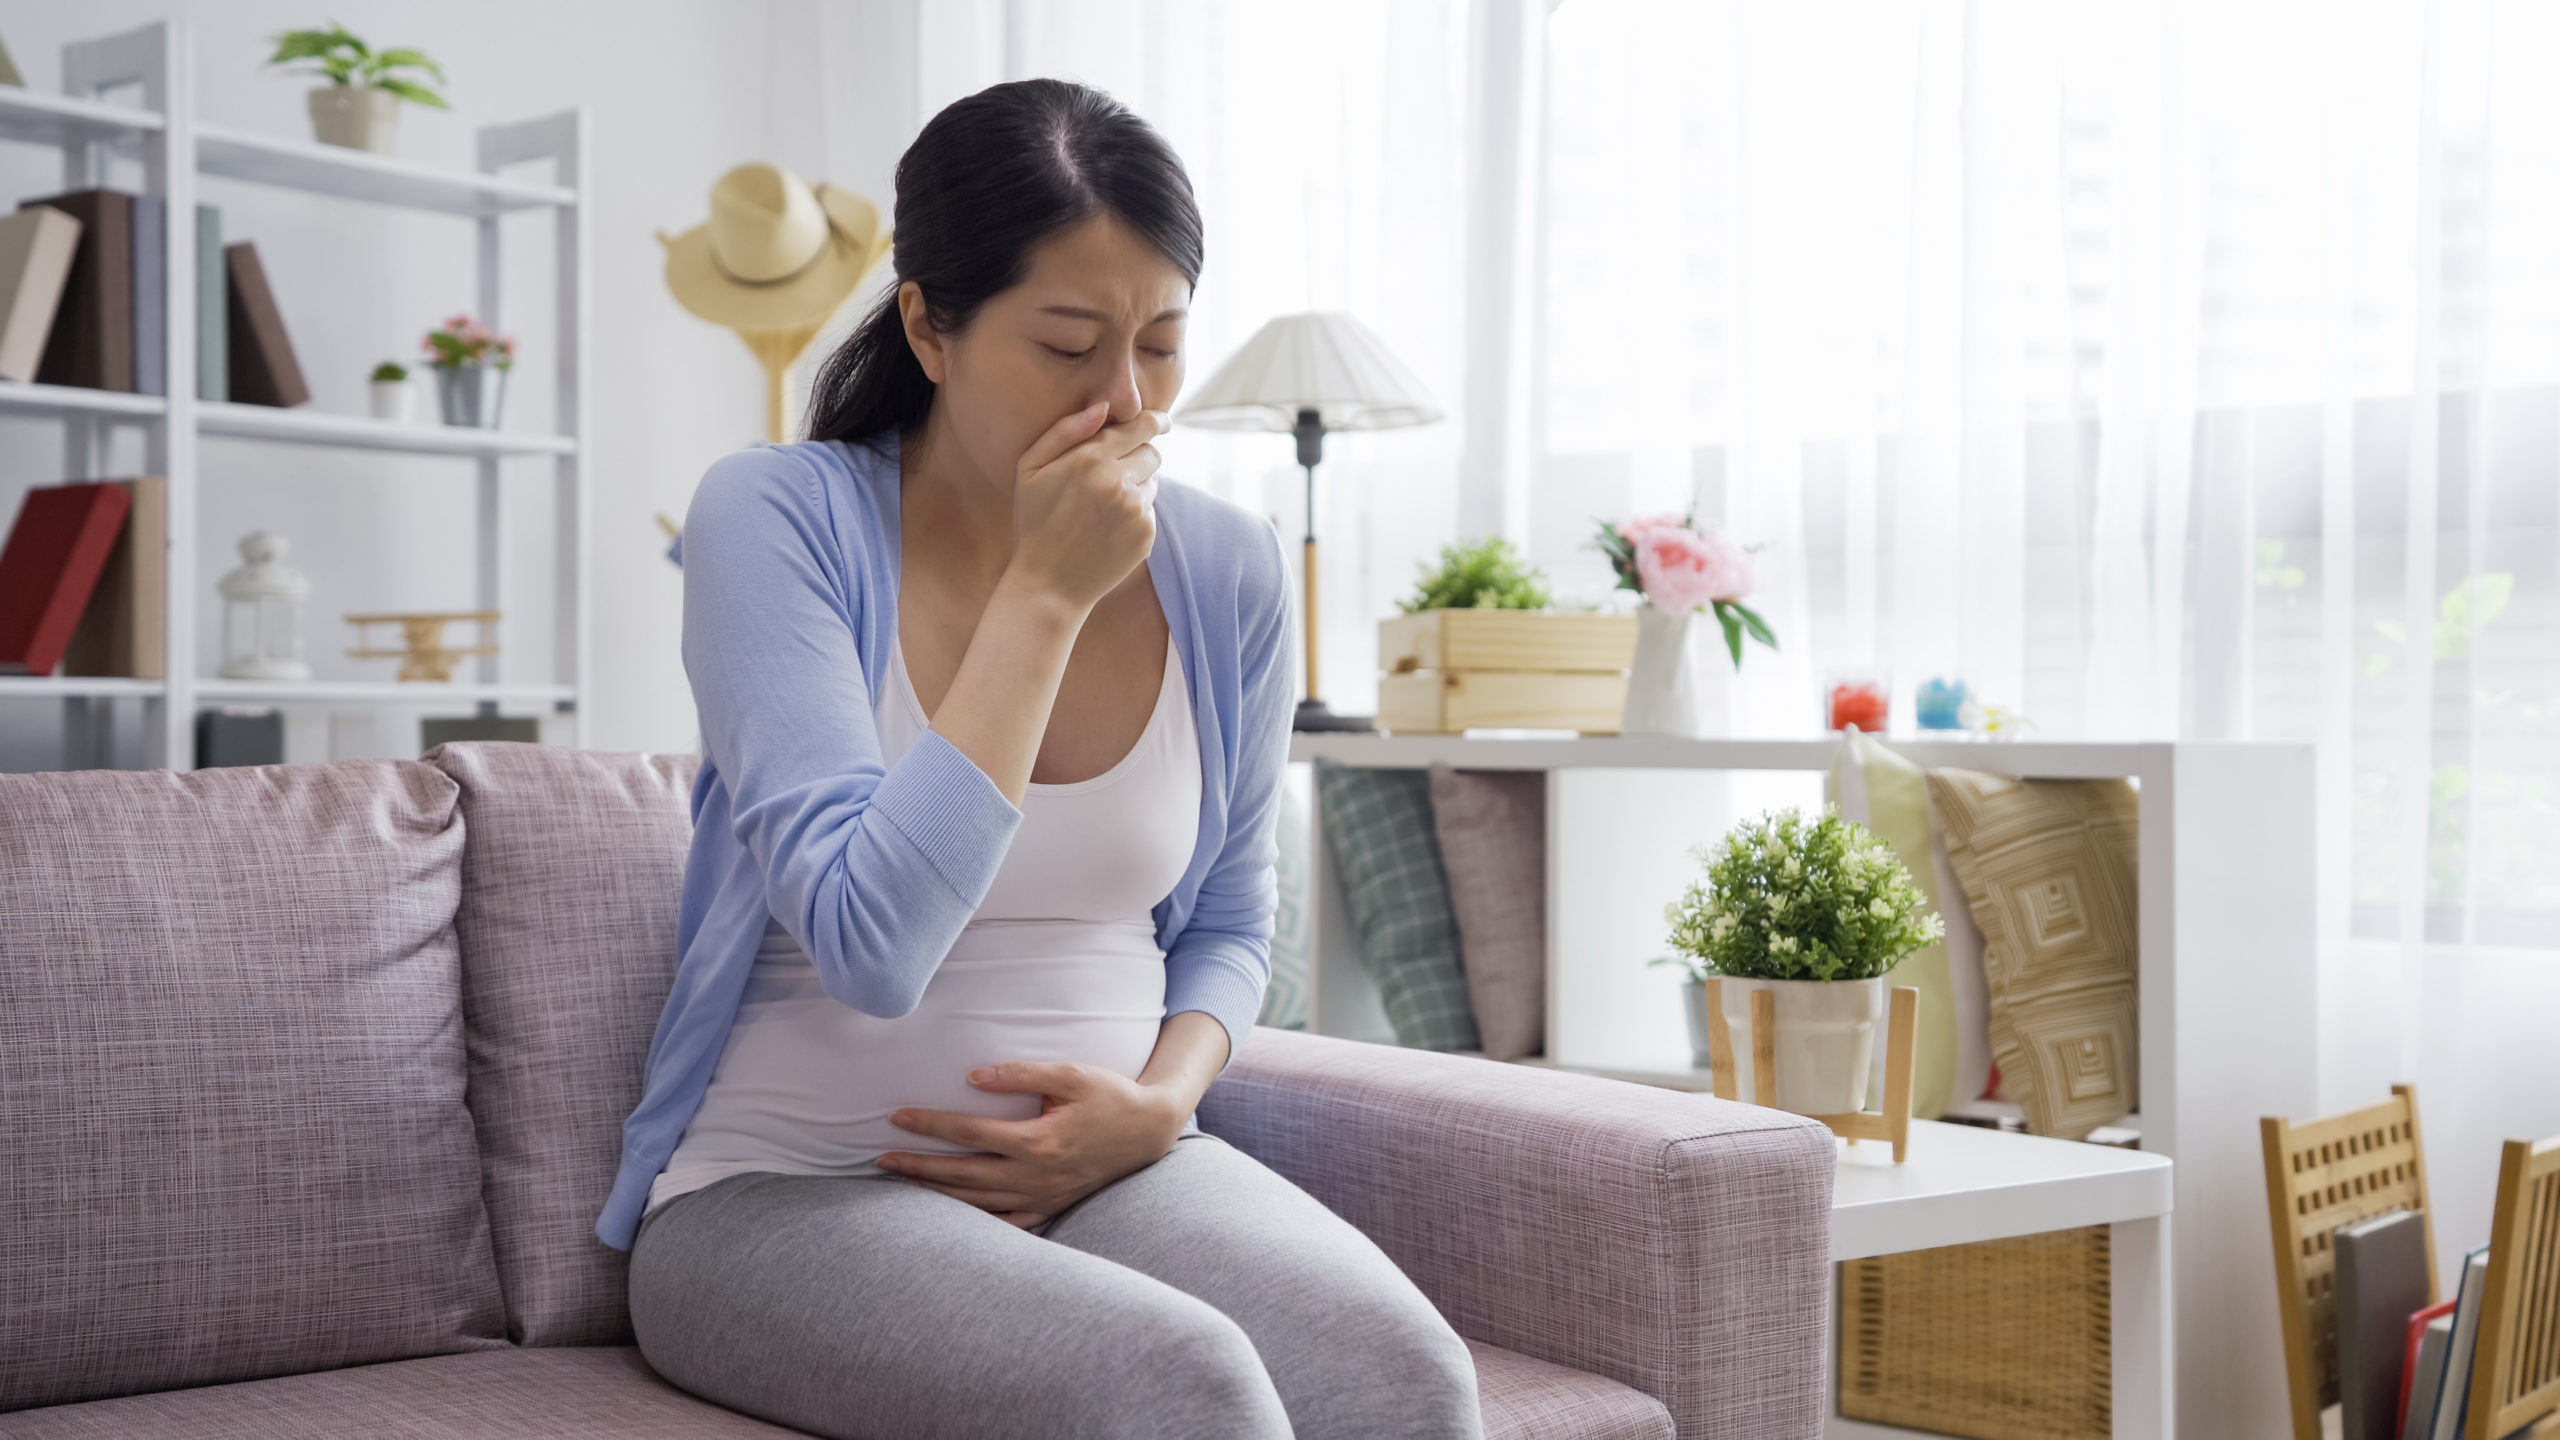 10 Tips To Relieve Morning Sickness Now